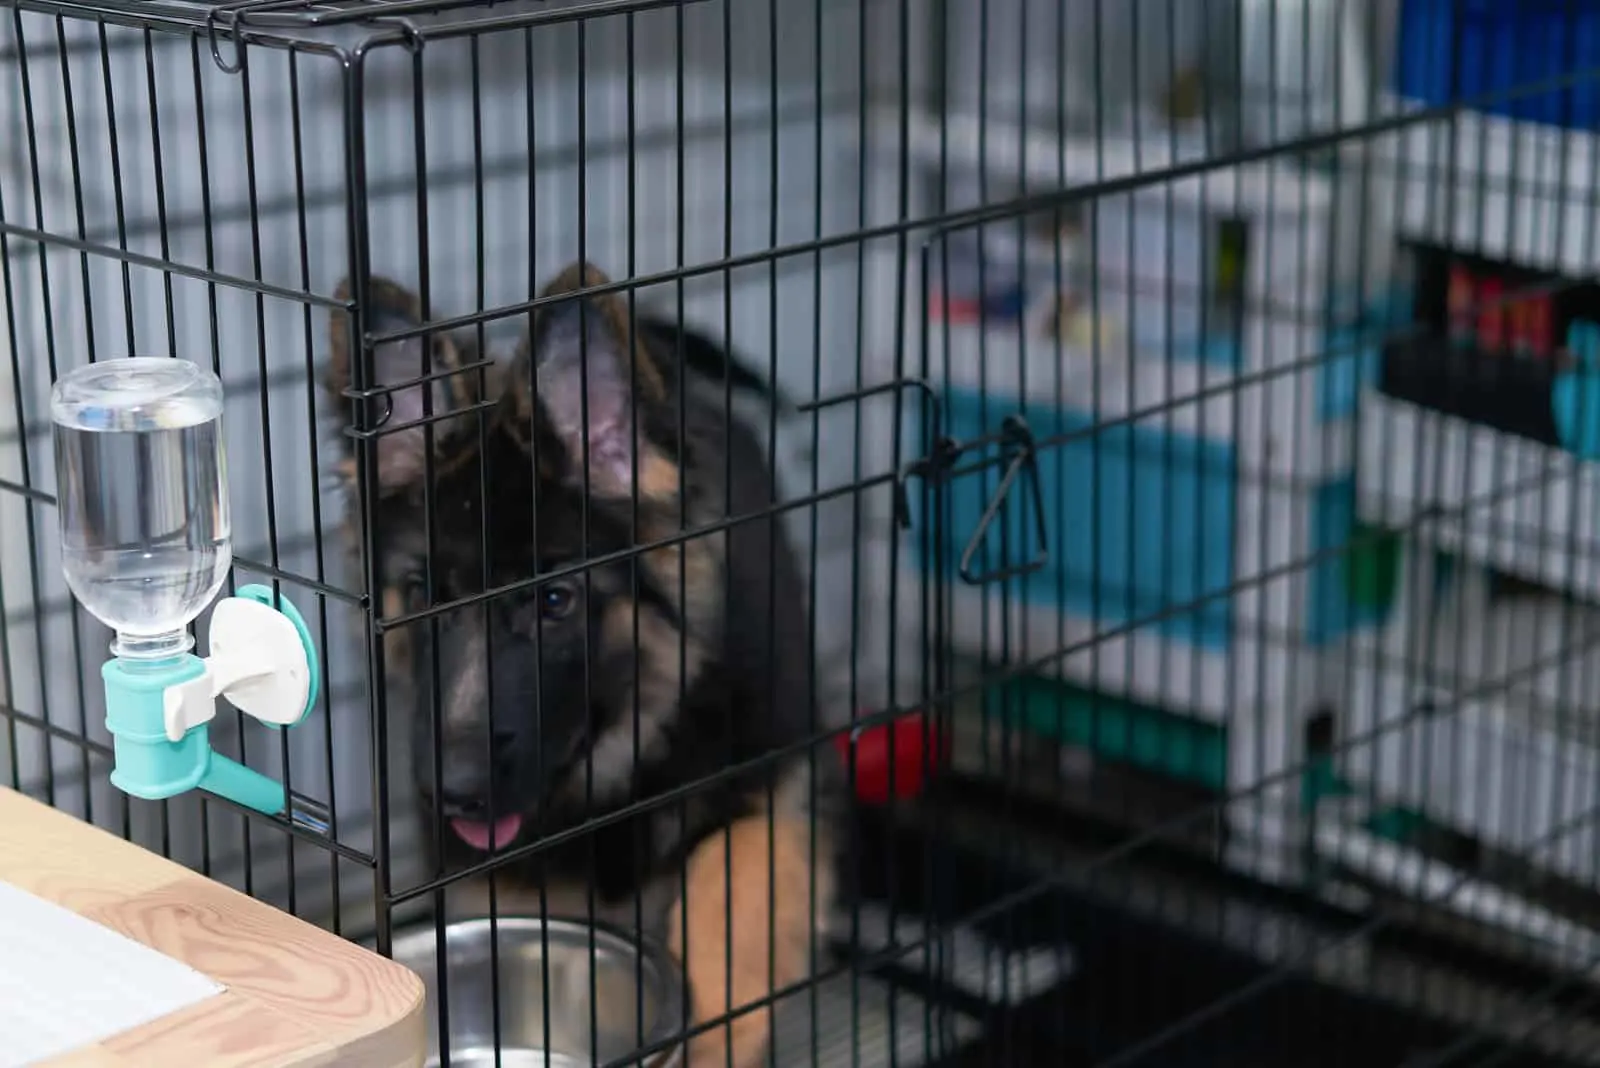 German Shepherd puppy sitting in cage in shelter